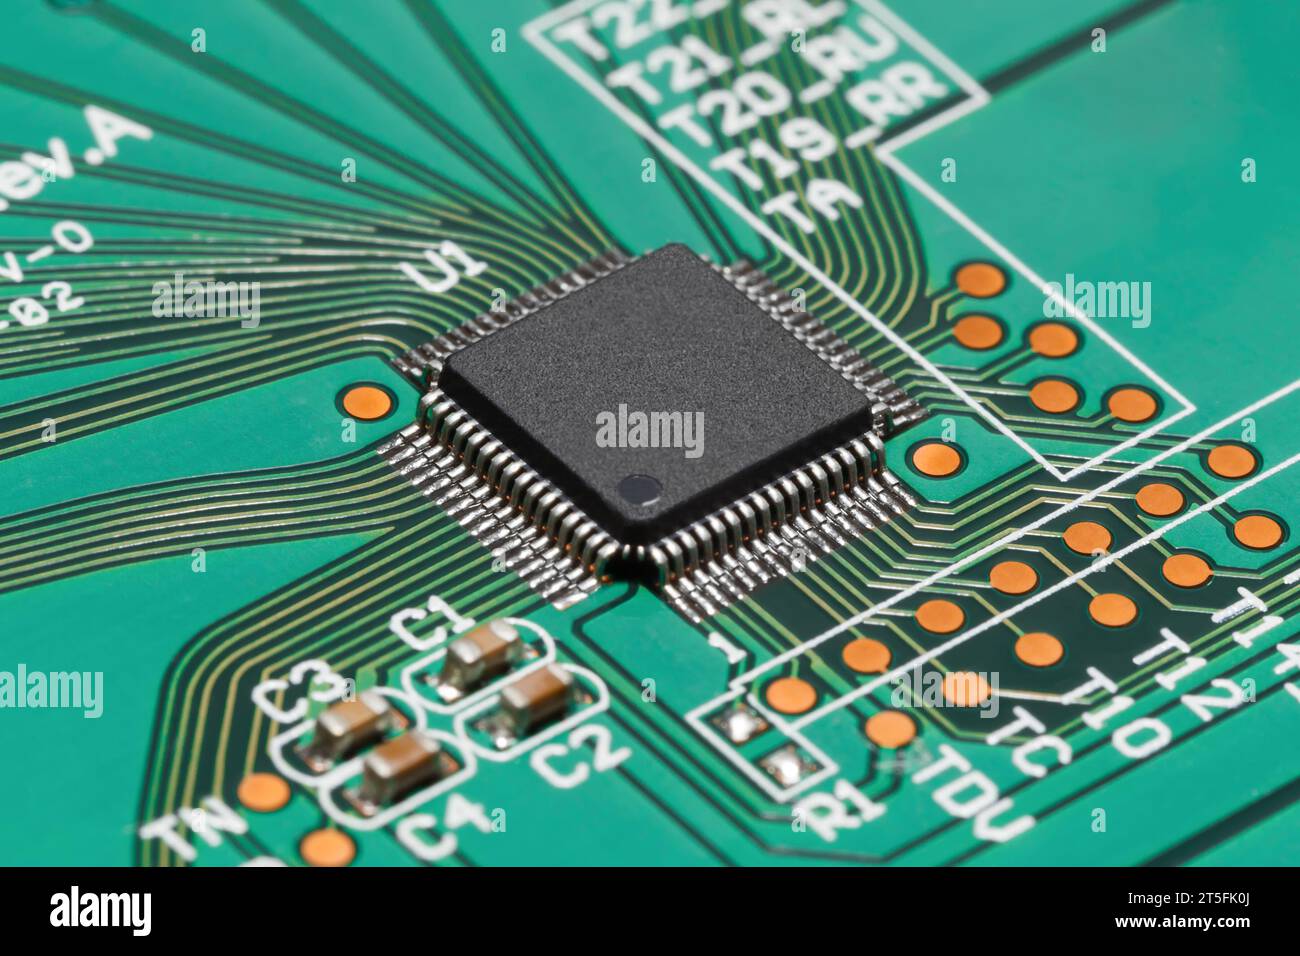 Chip on a green printed circuit board. Technologies, microelectronics. Macro photography Stock Photo